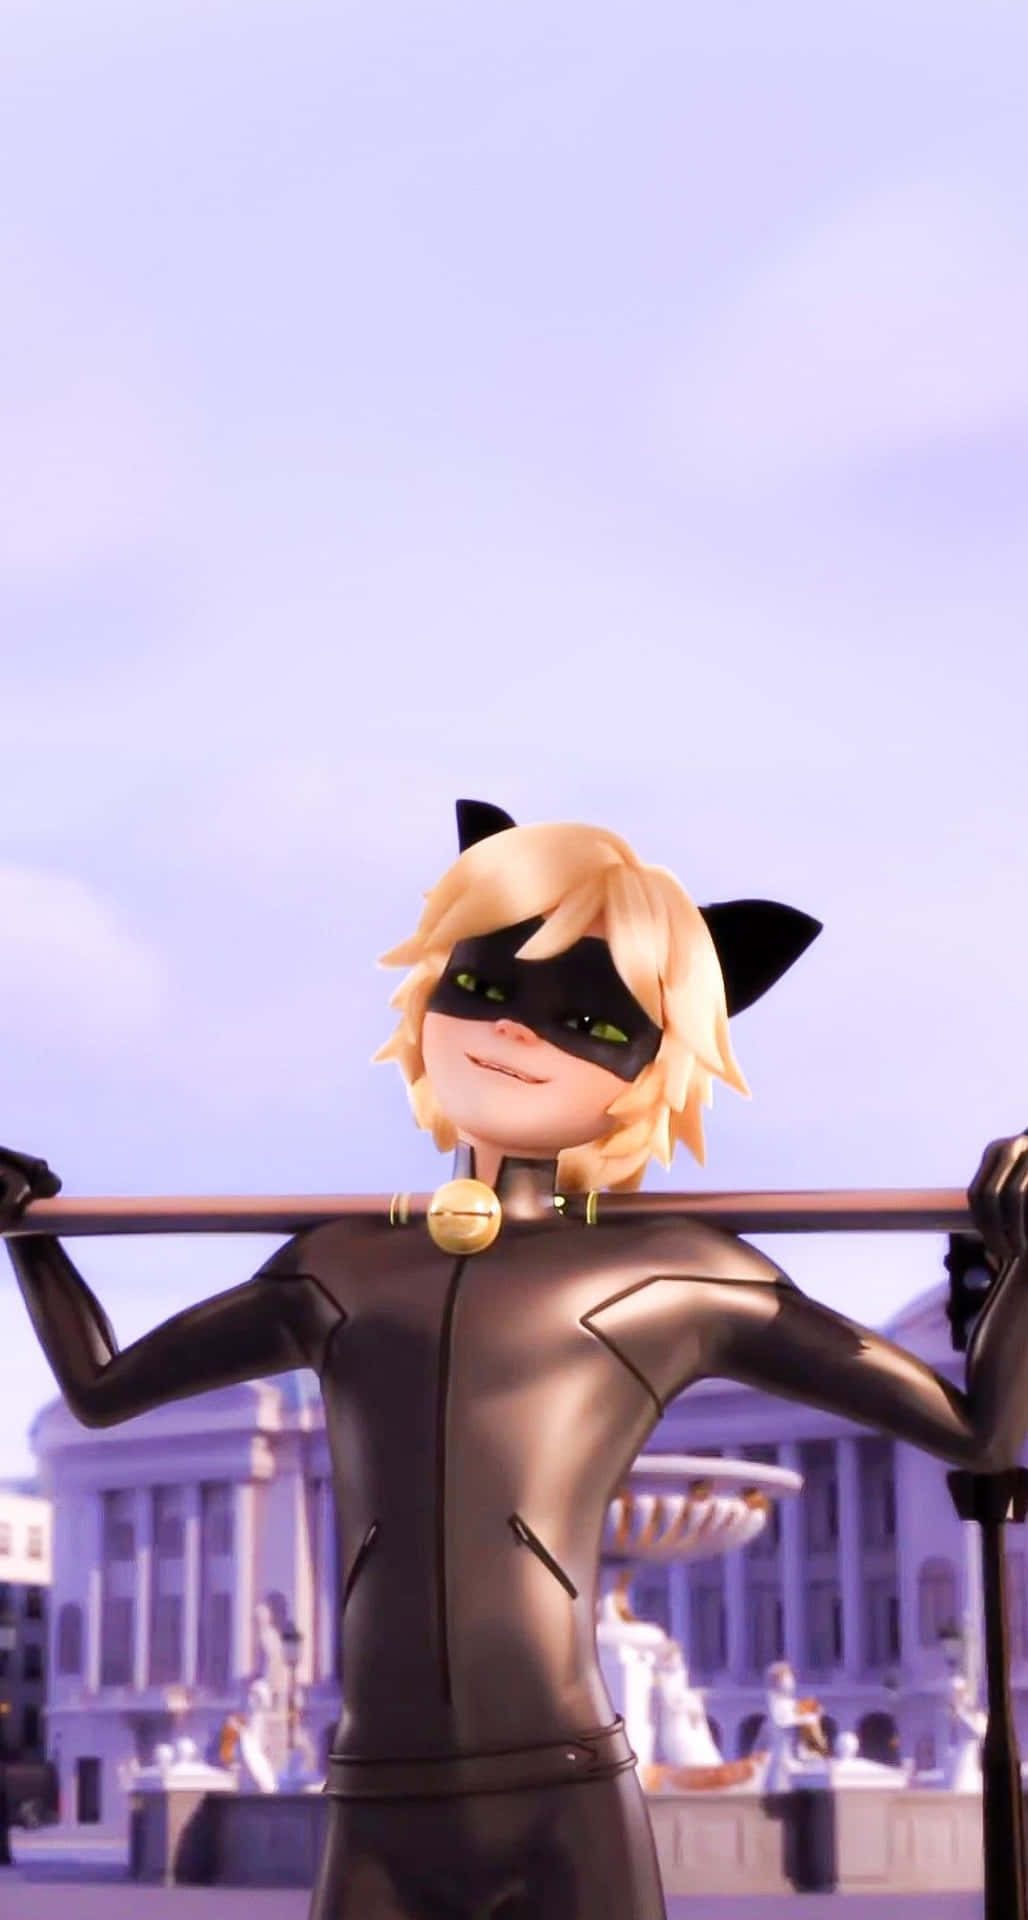 100+] Chat Noir Wallpapers